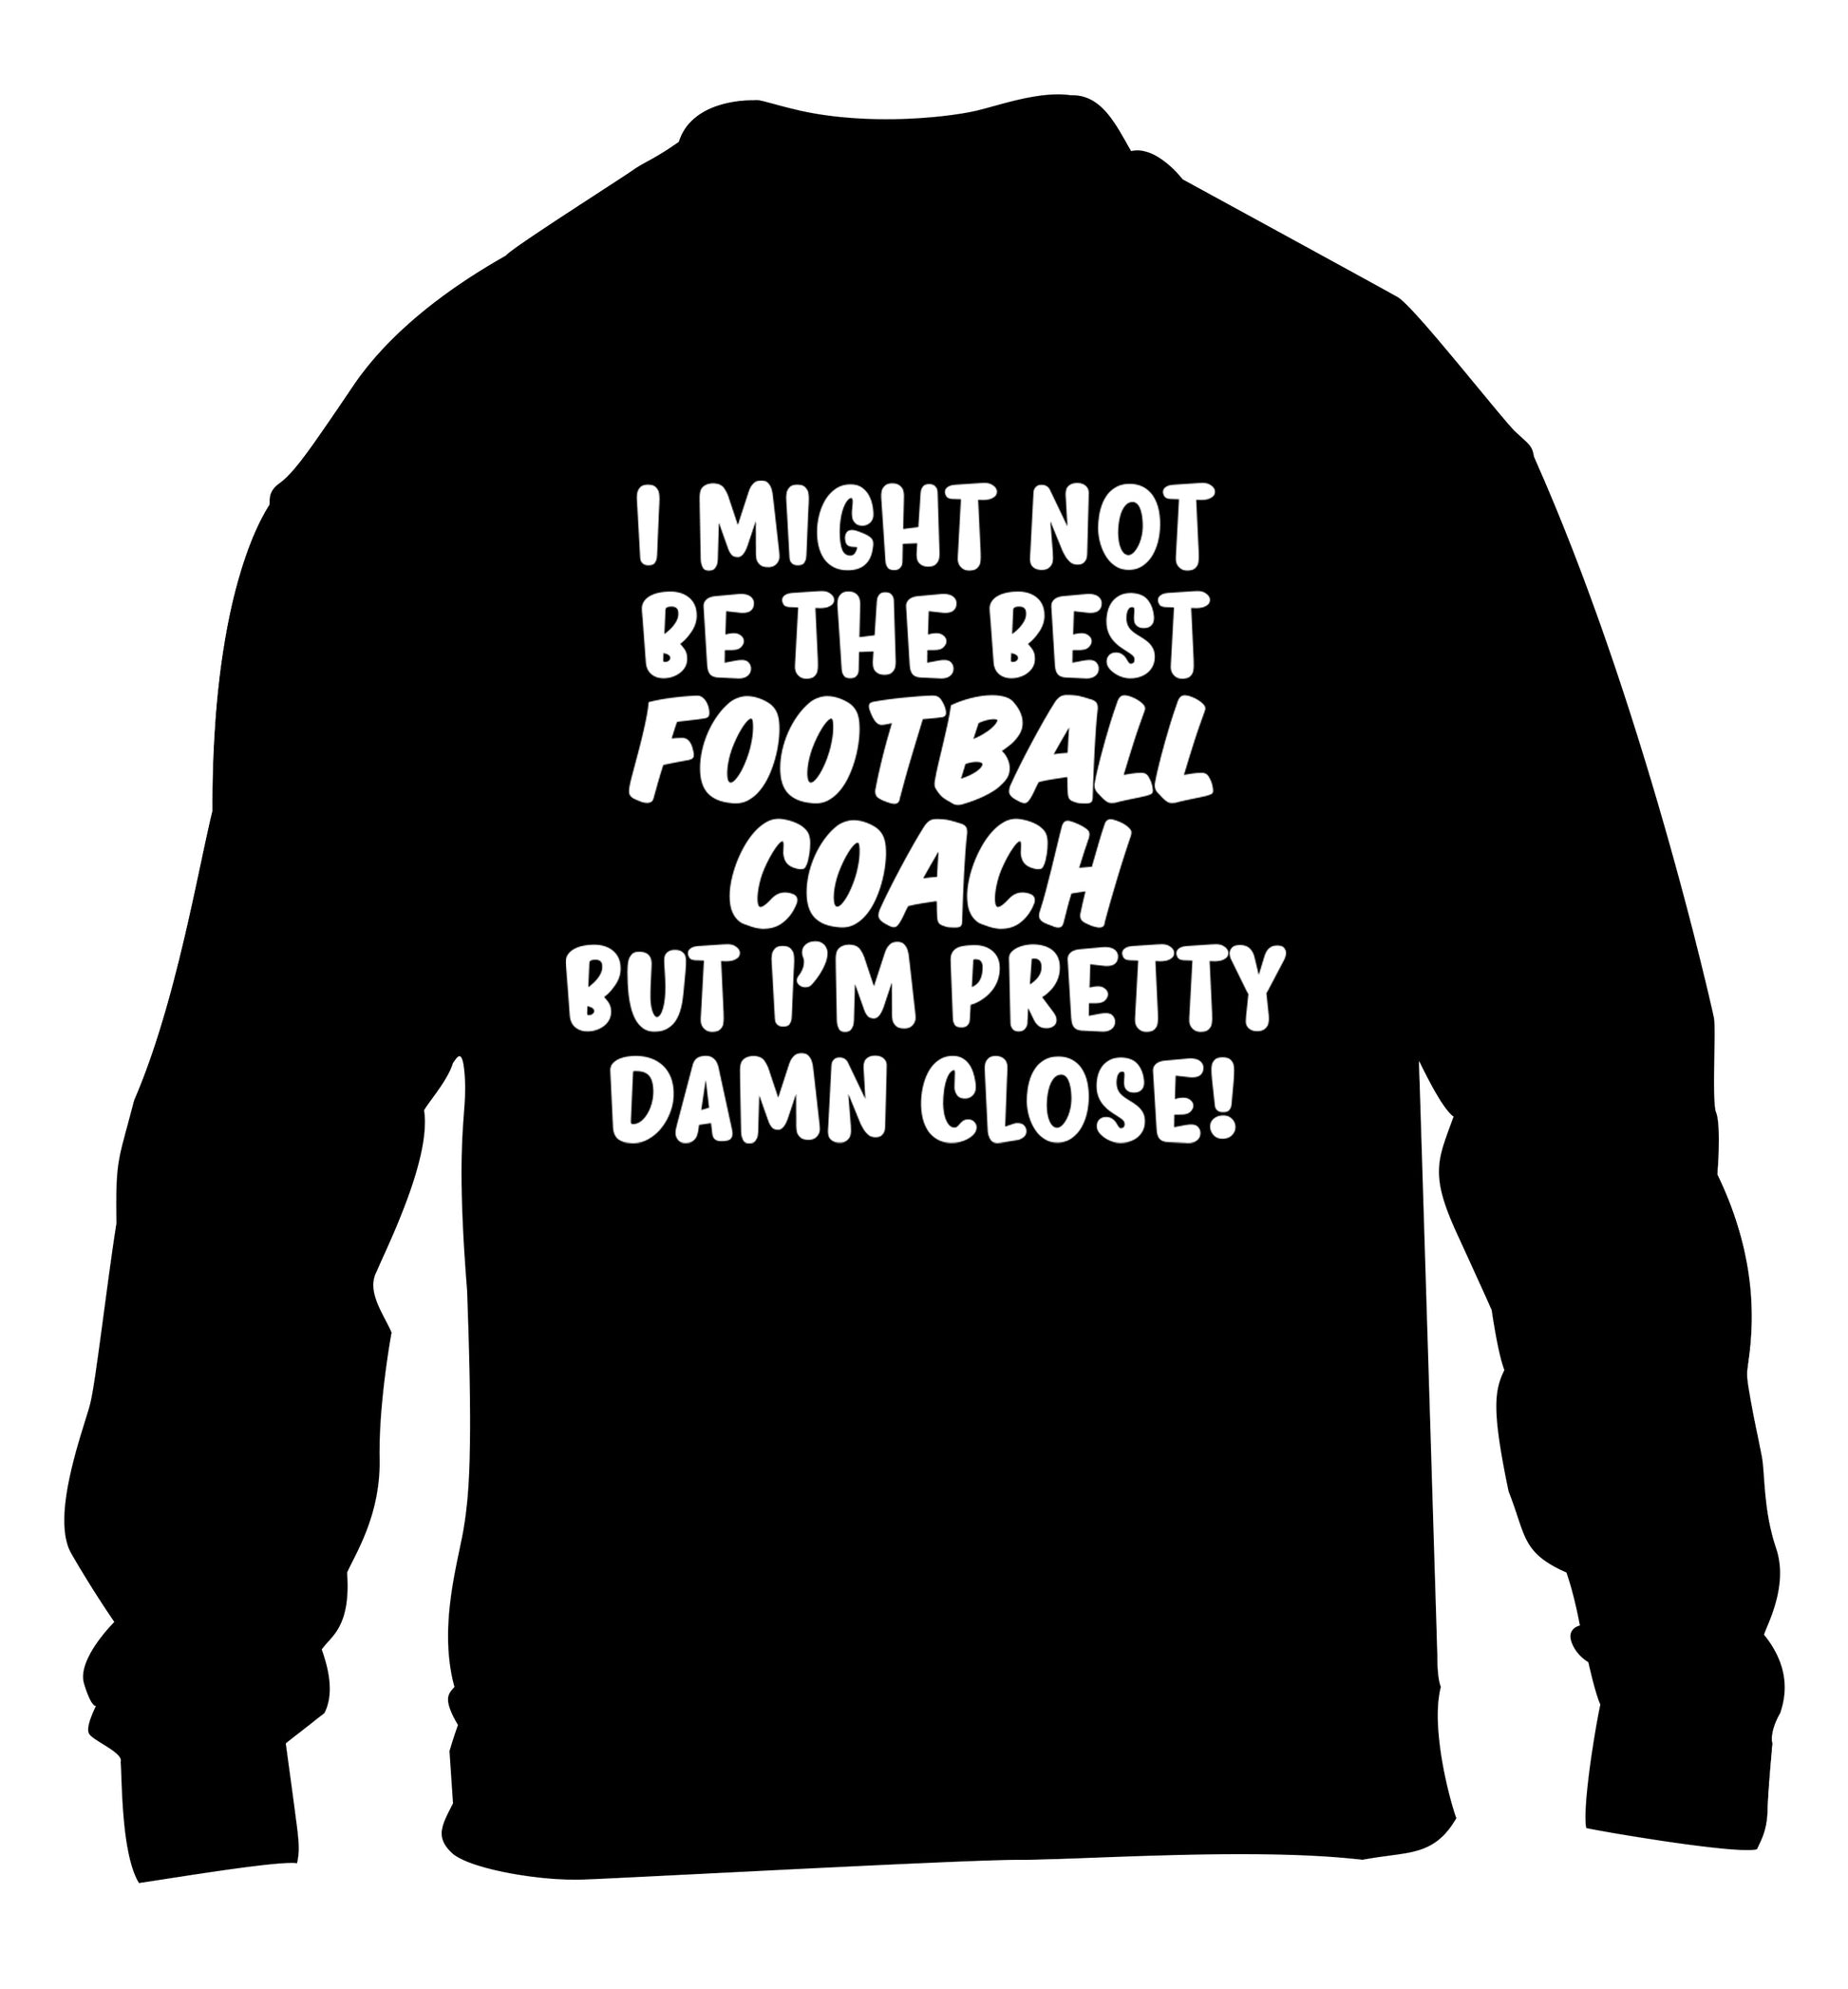 I might not be the best football coach but I'm pretty close! children's black sweater 12-14 Years